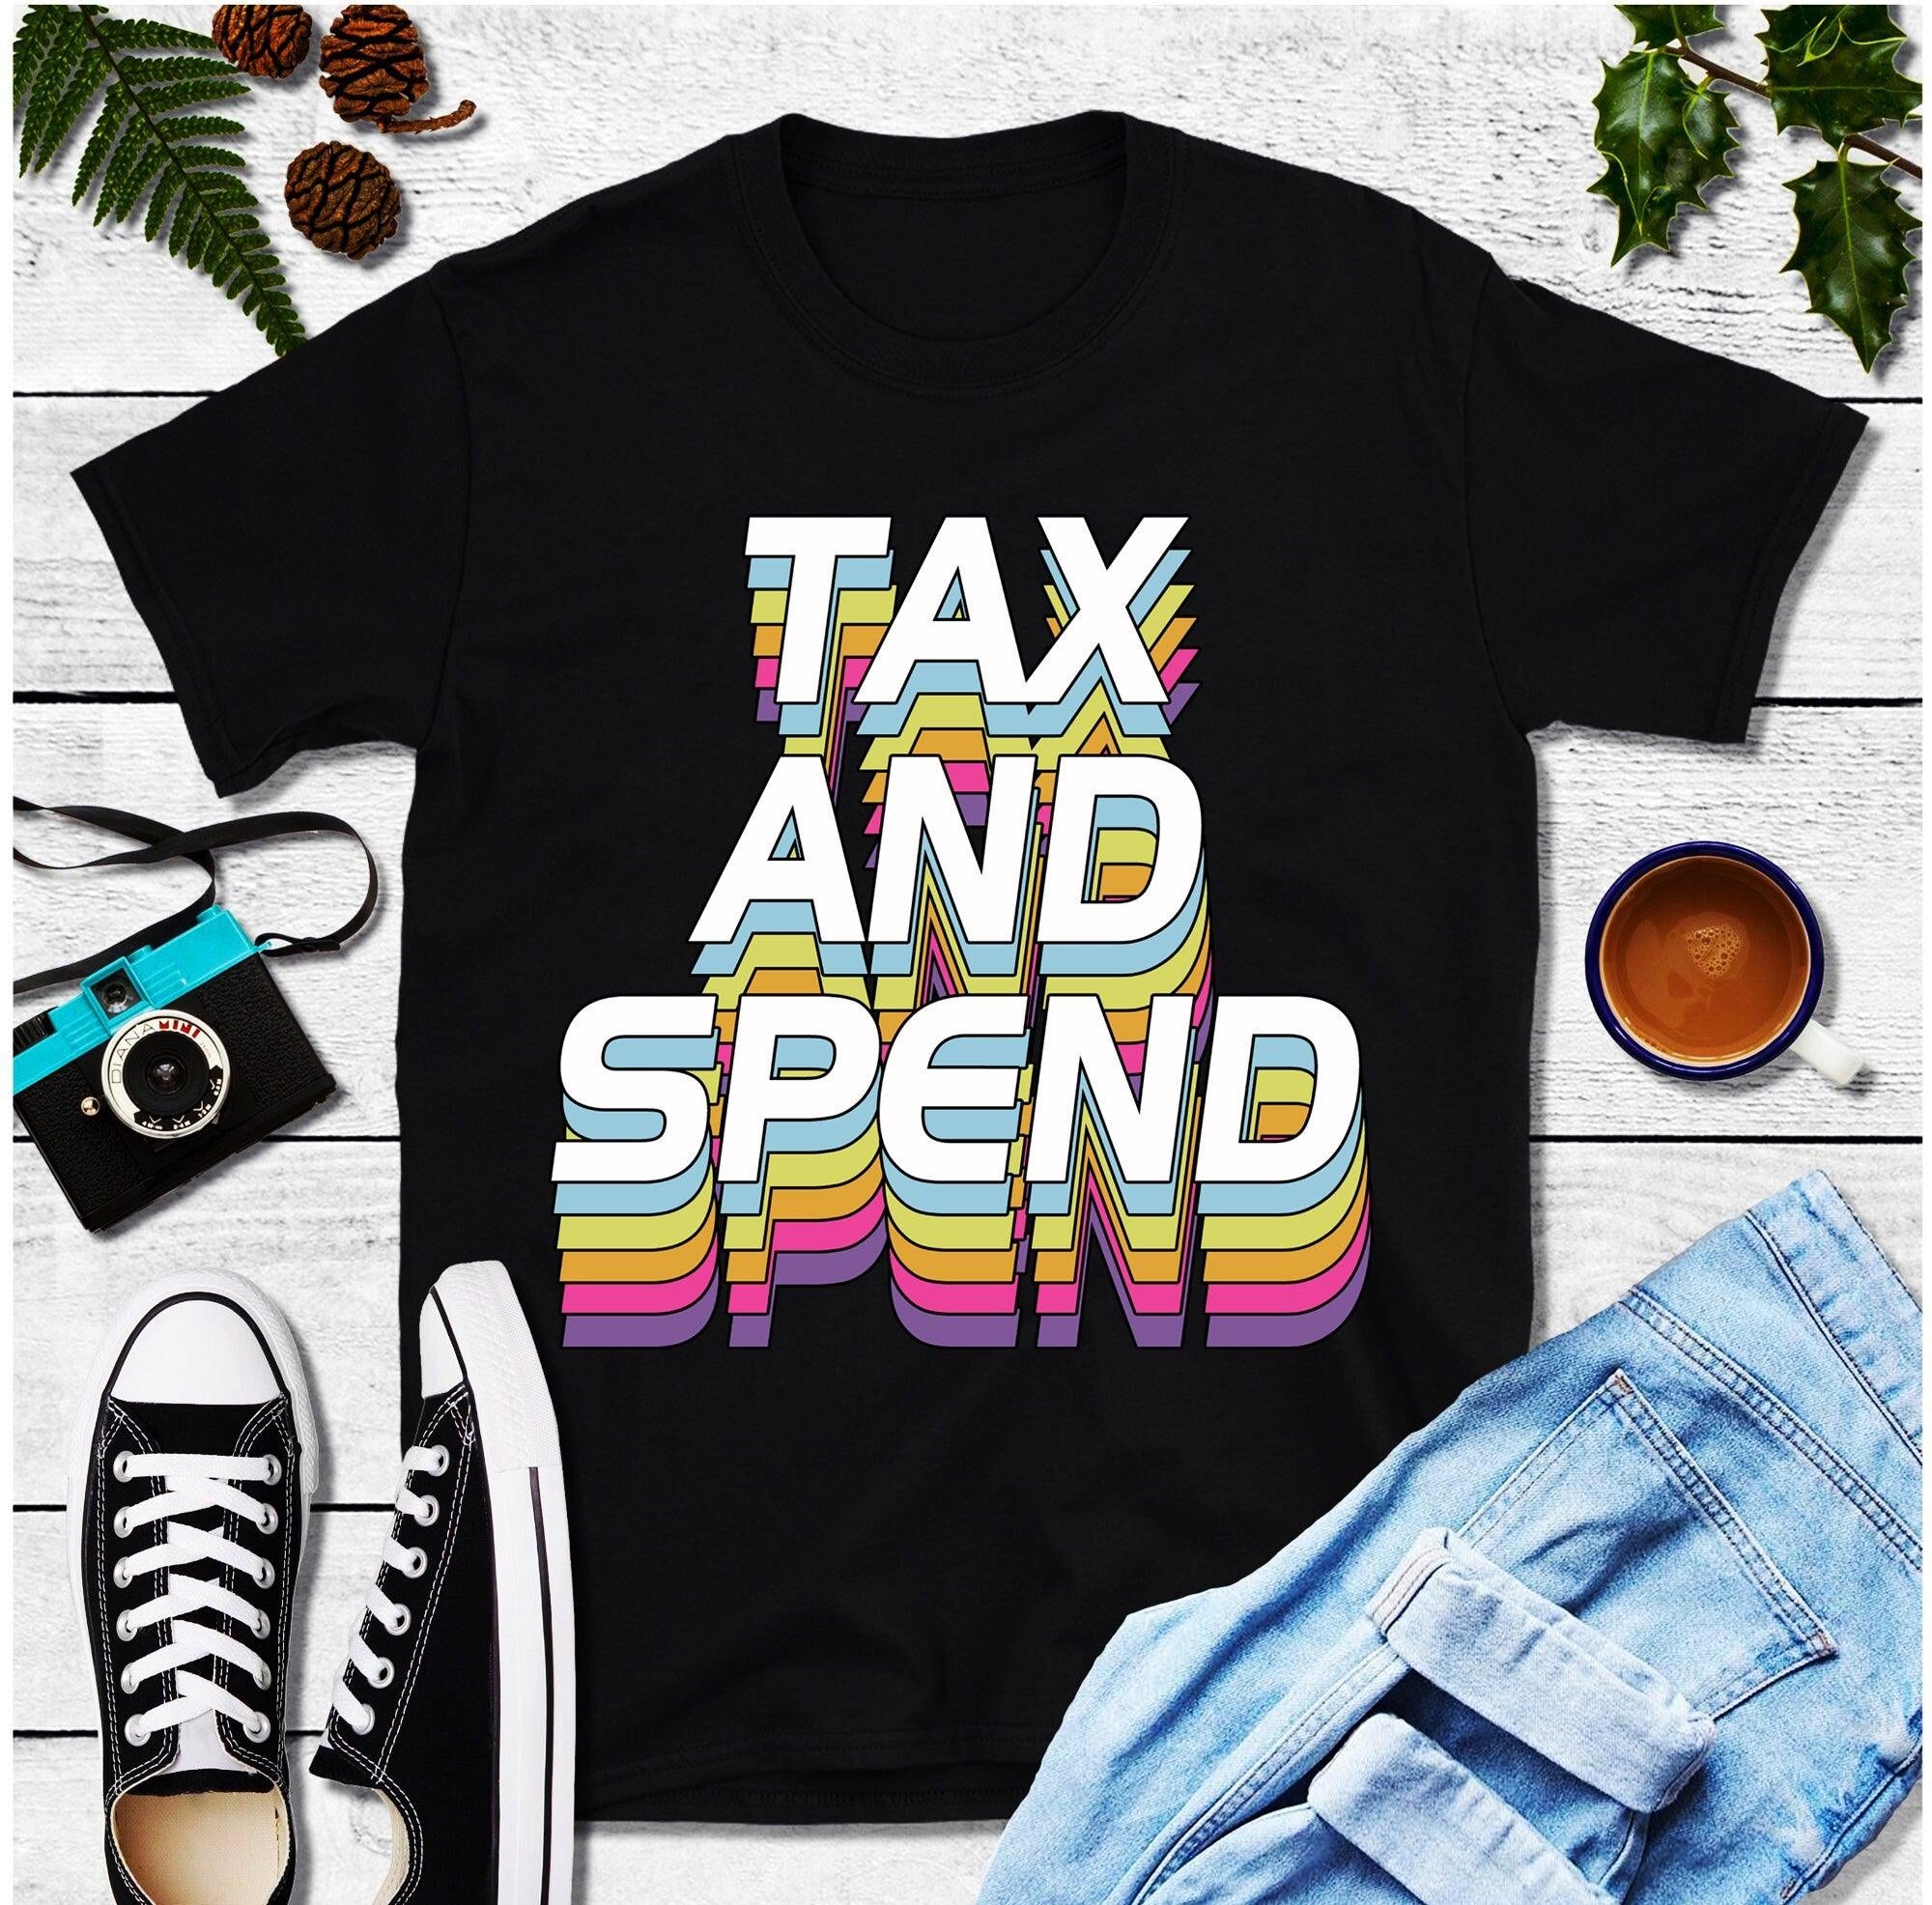 Tax And Spend, Multicolor Print T-Shirts, Liberal Shirt, Political shirt, Politics, Liberal - plusminusco.com